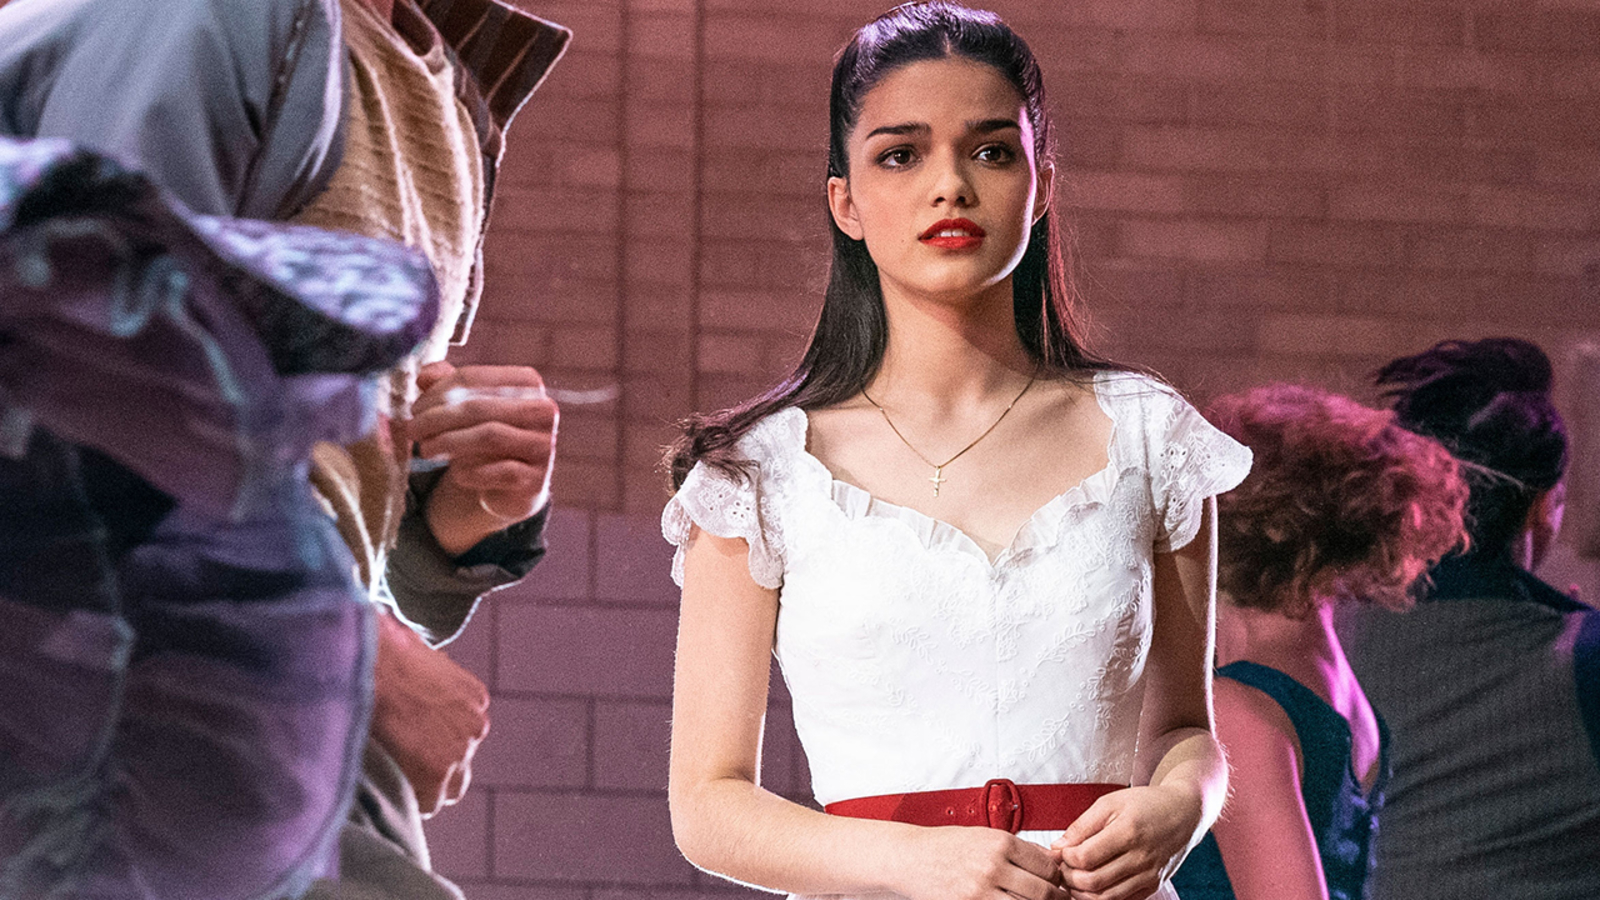 Rachel Zegler To Play Snow White In Disney Live Action Movie After 'West Side Story' Feature Film Debut In 2021